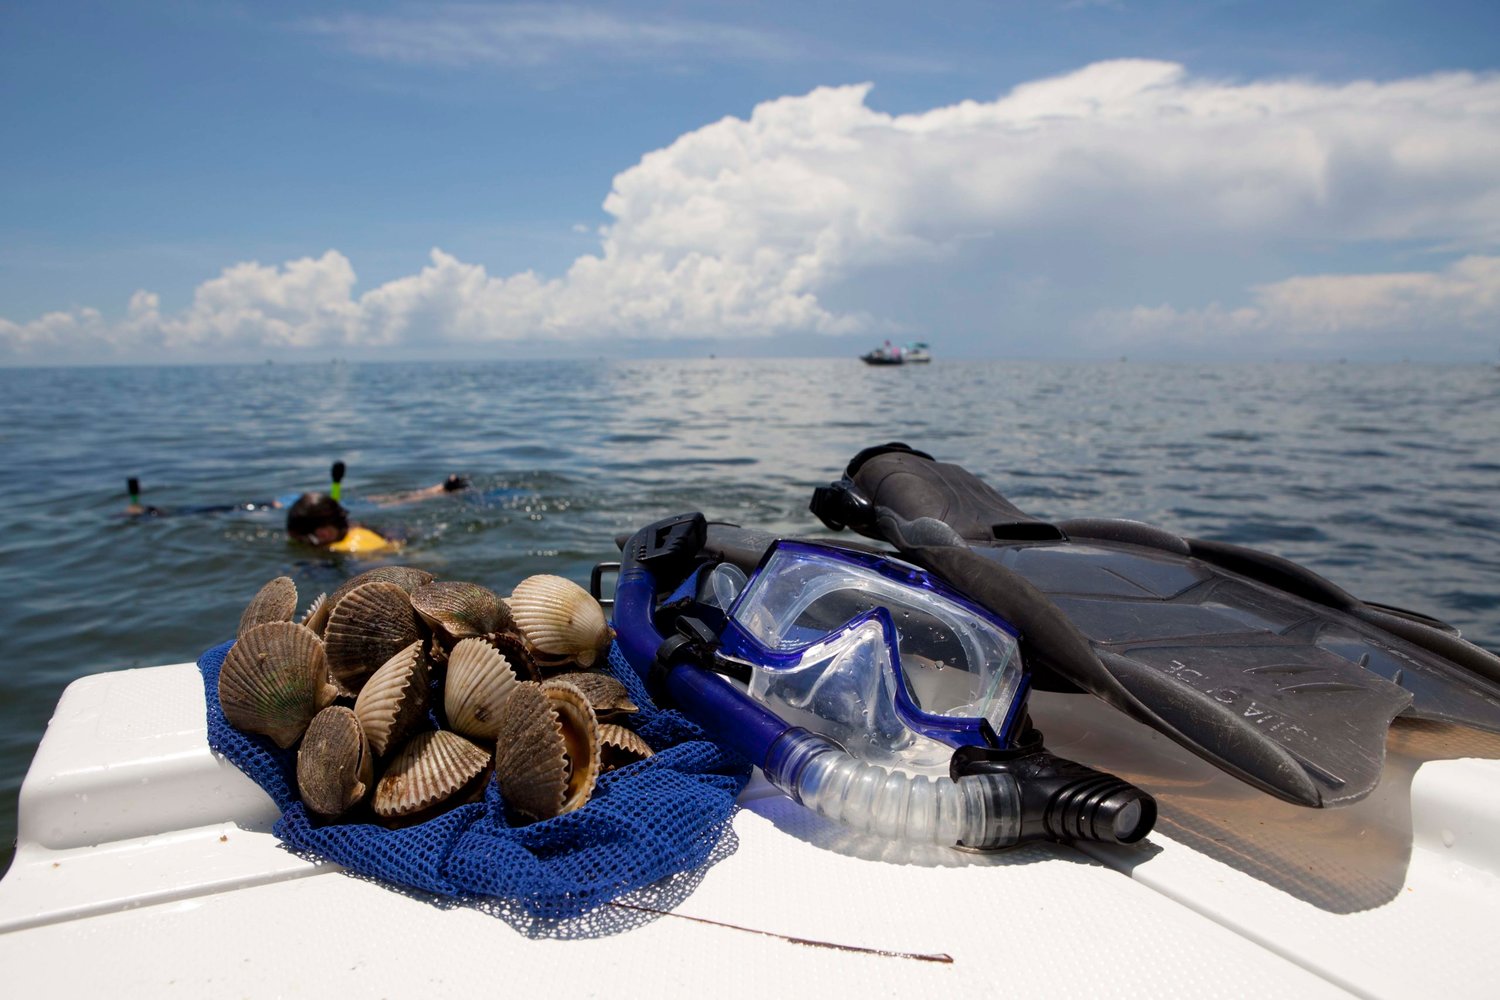 Scallops, snorkeling equipment, and scallopers off the coast of Keaton Beach, Florida.